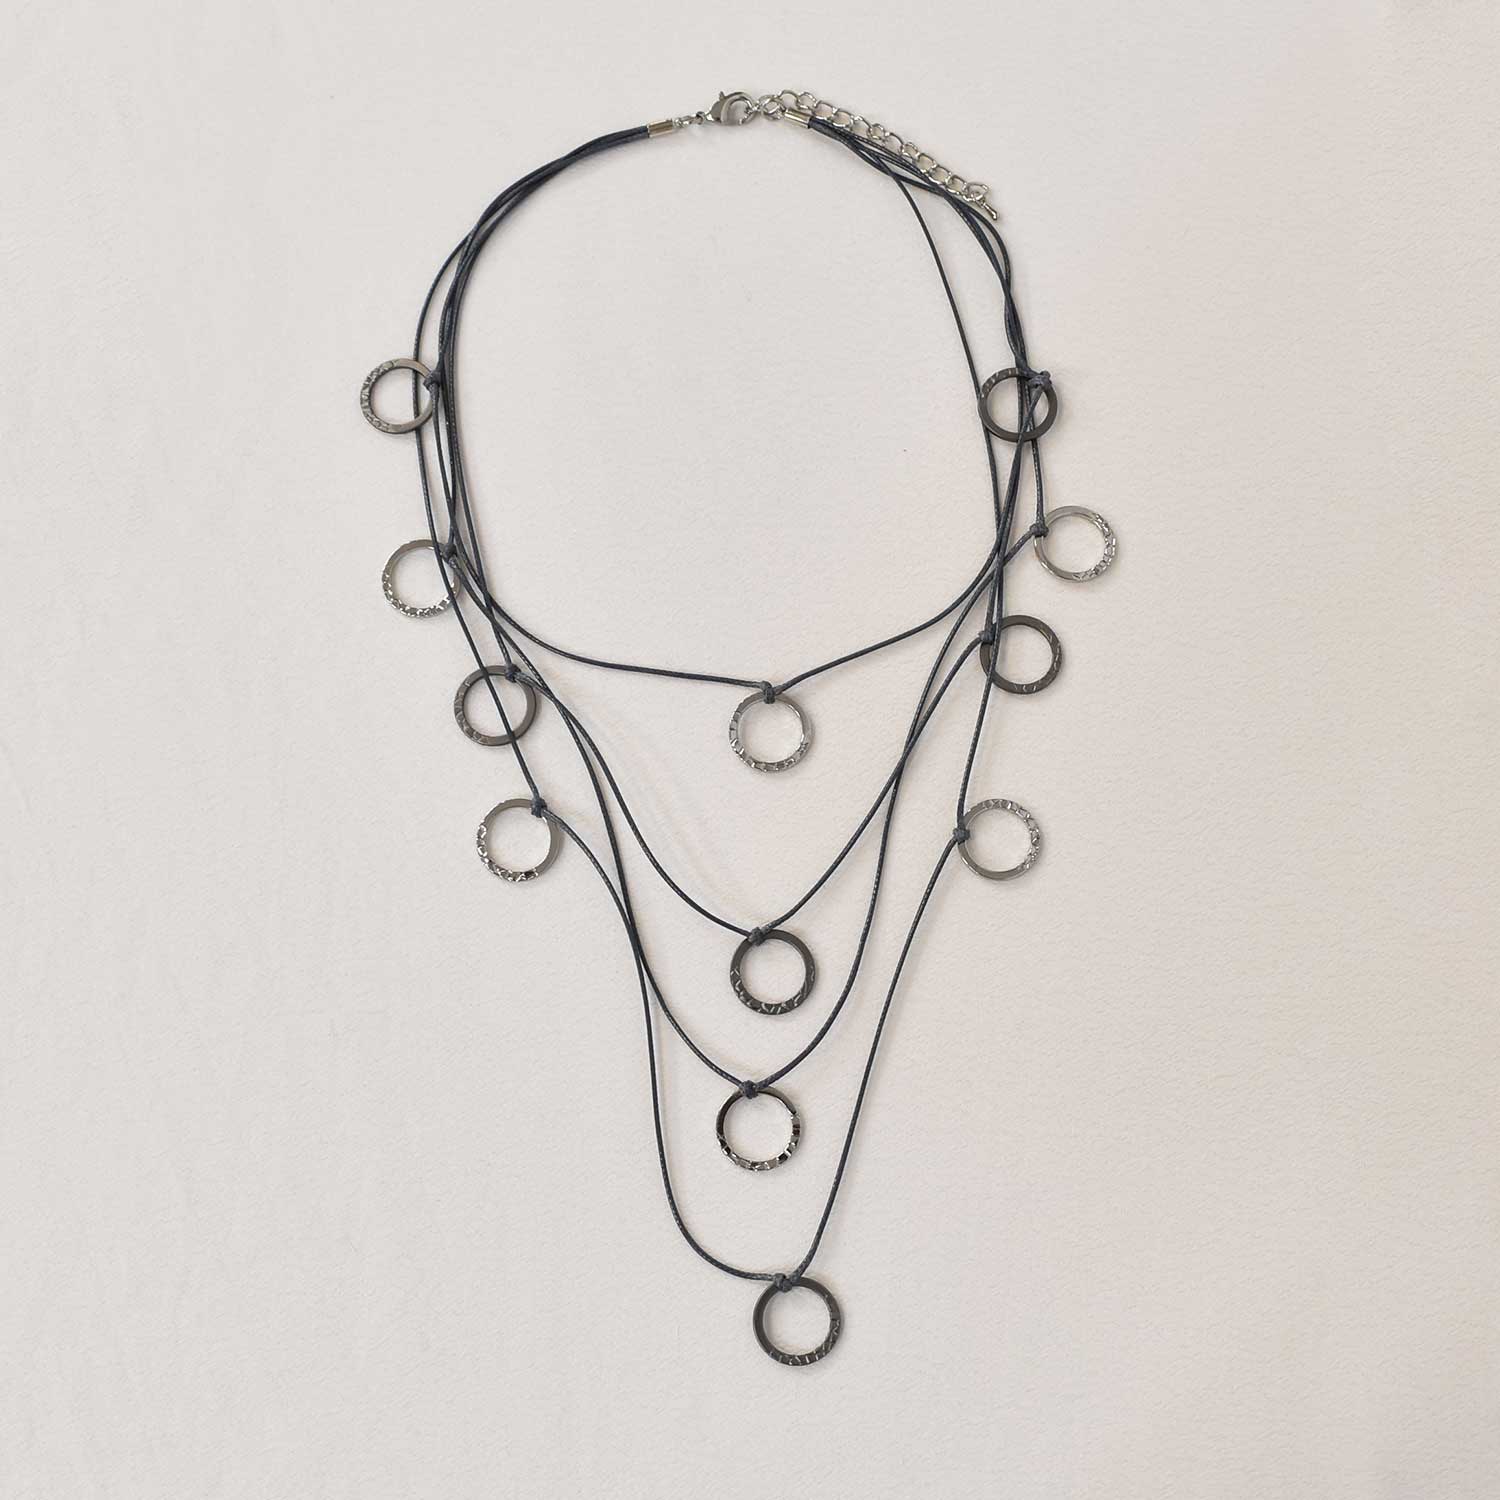 Waxed rope necklace hoops silver